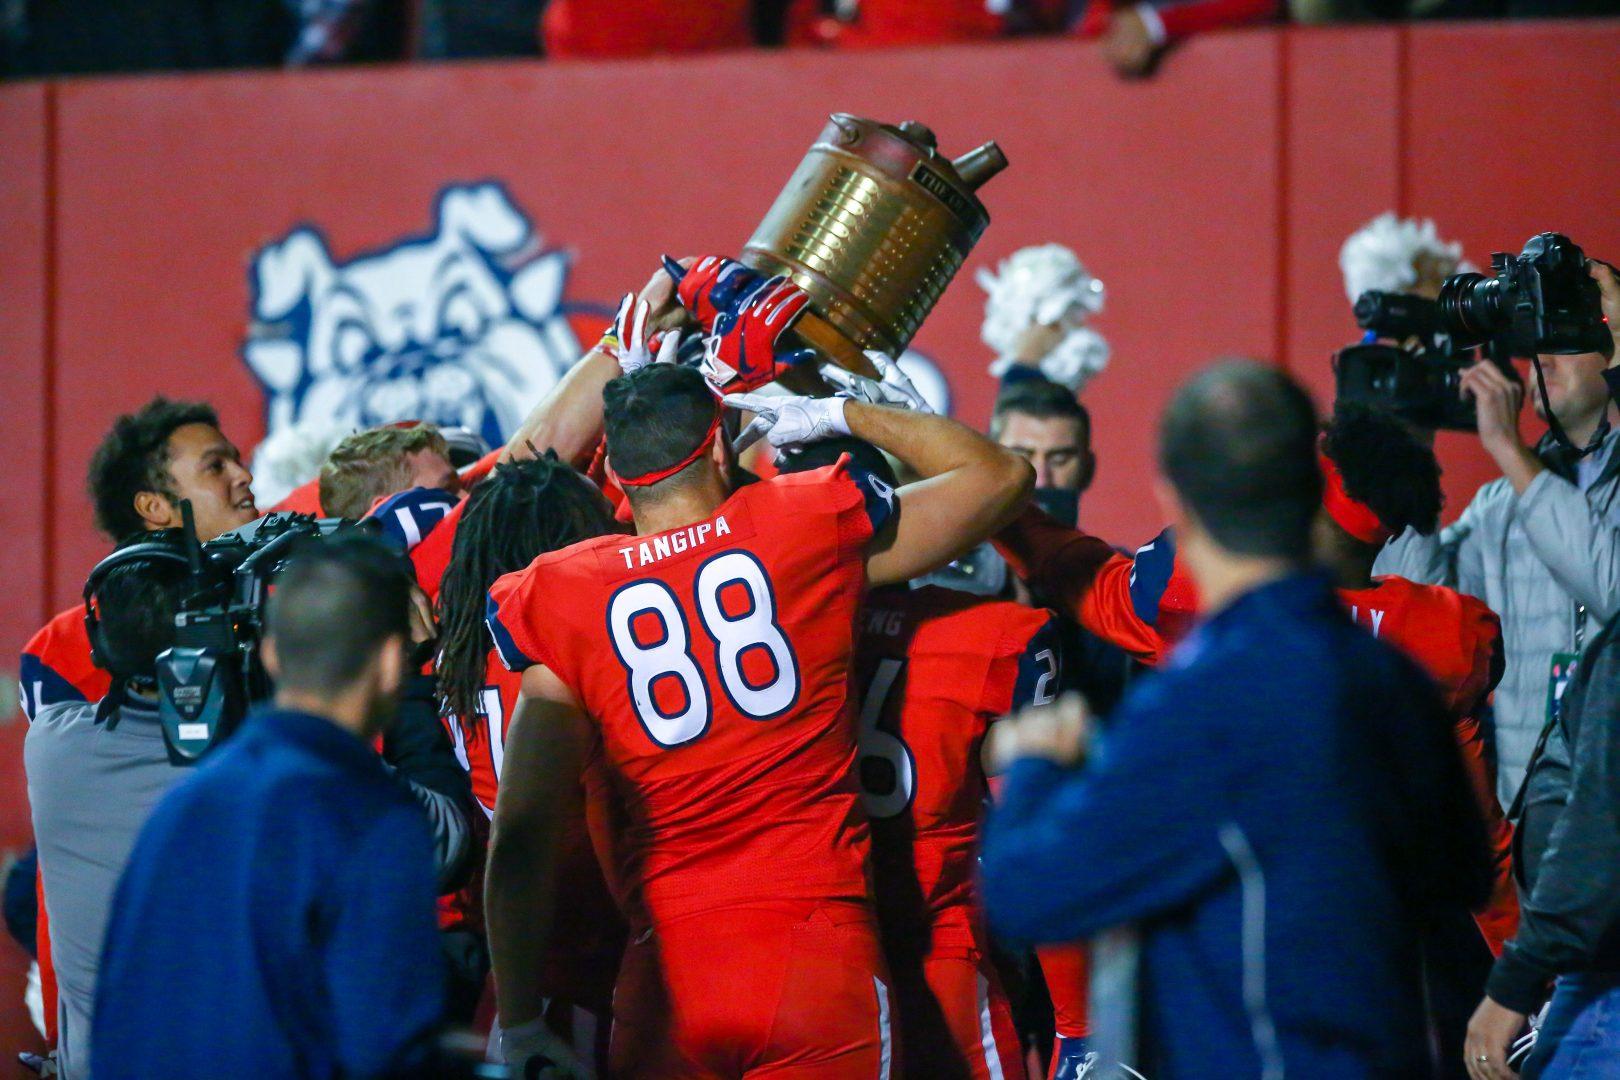 The Bulldogs celebrate their 23-14 victory over San Diego State as they lift the Oil Can Trophy, Saturday, Nov. 17, 2018. (Jose Romo/The Collegian)